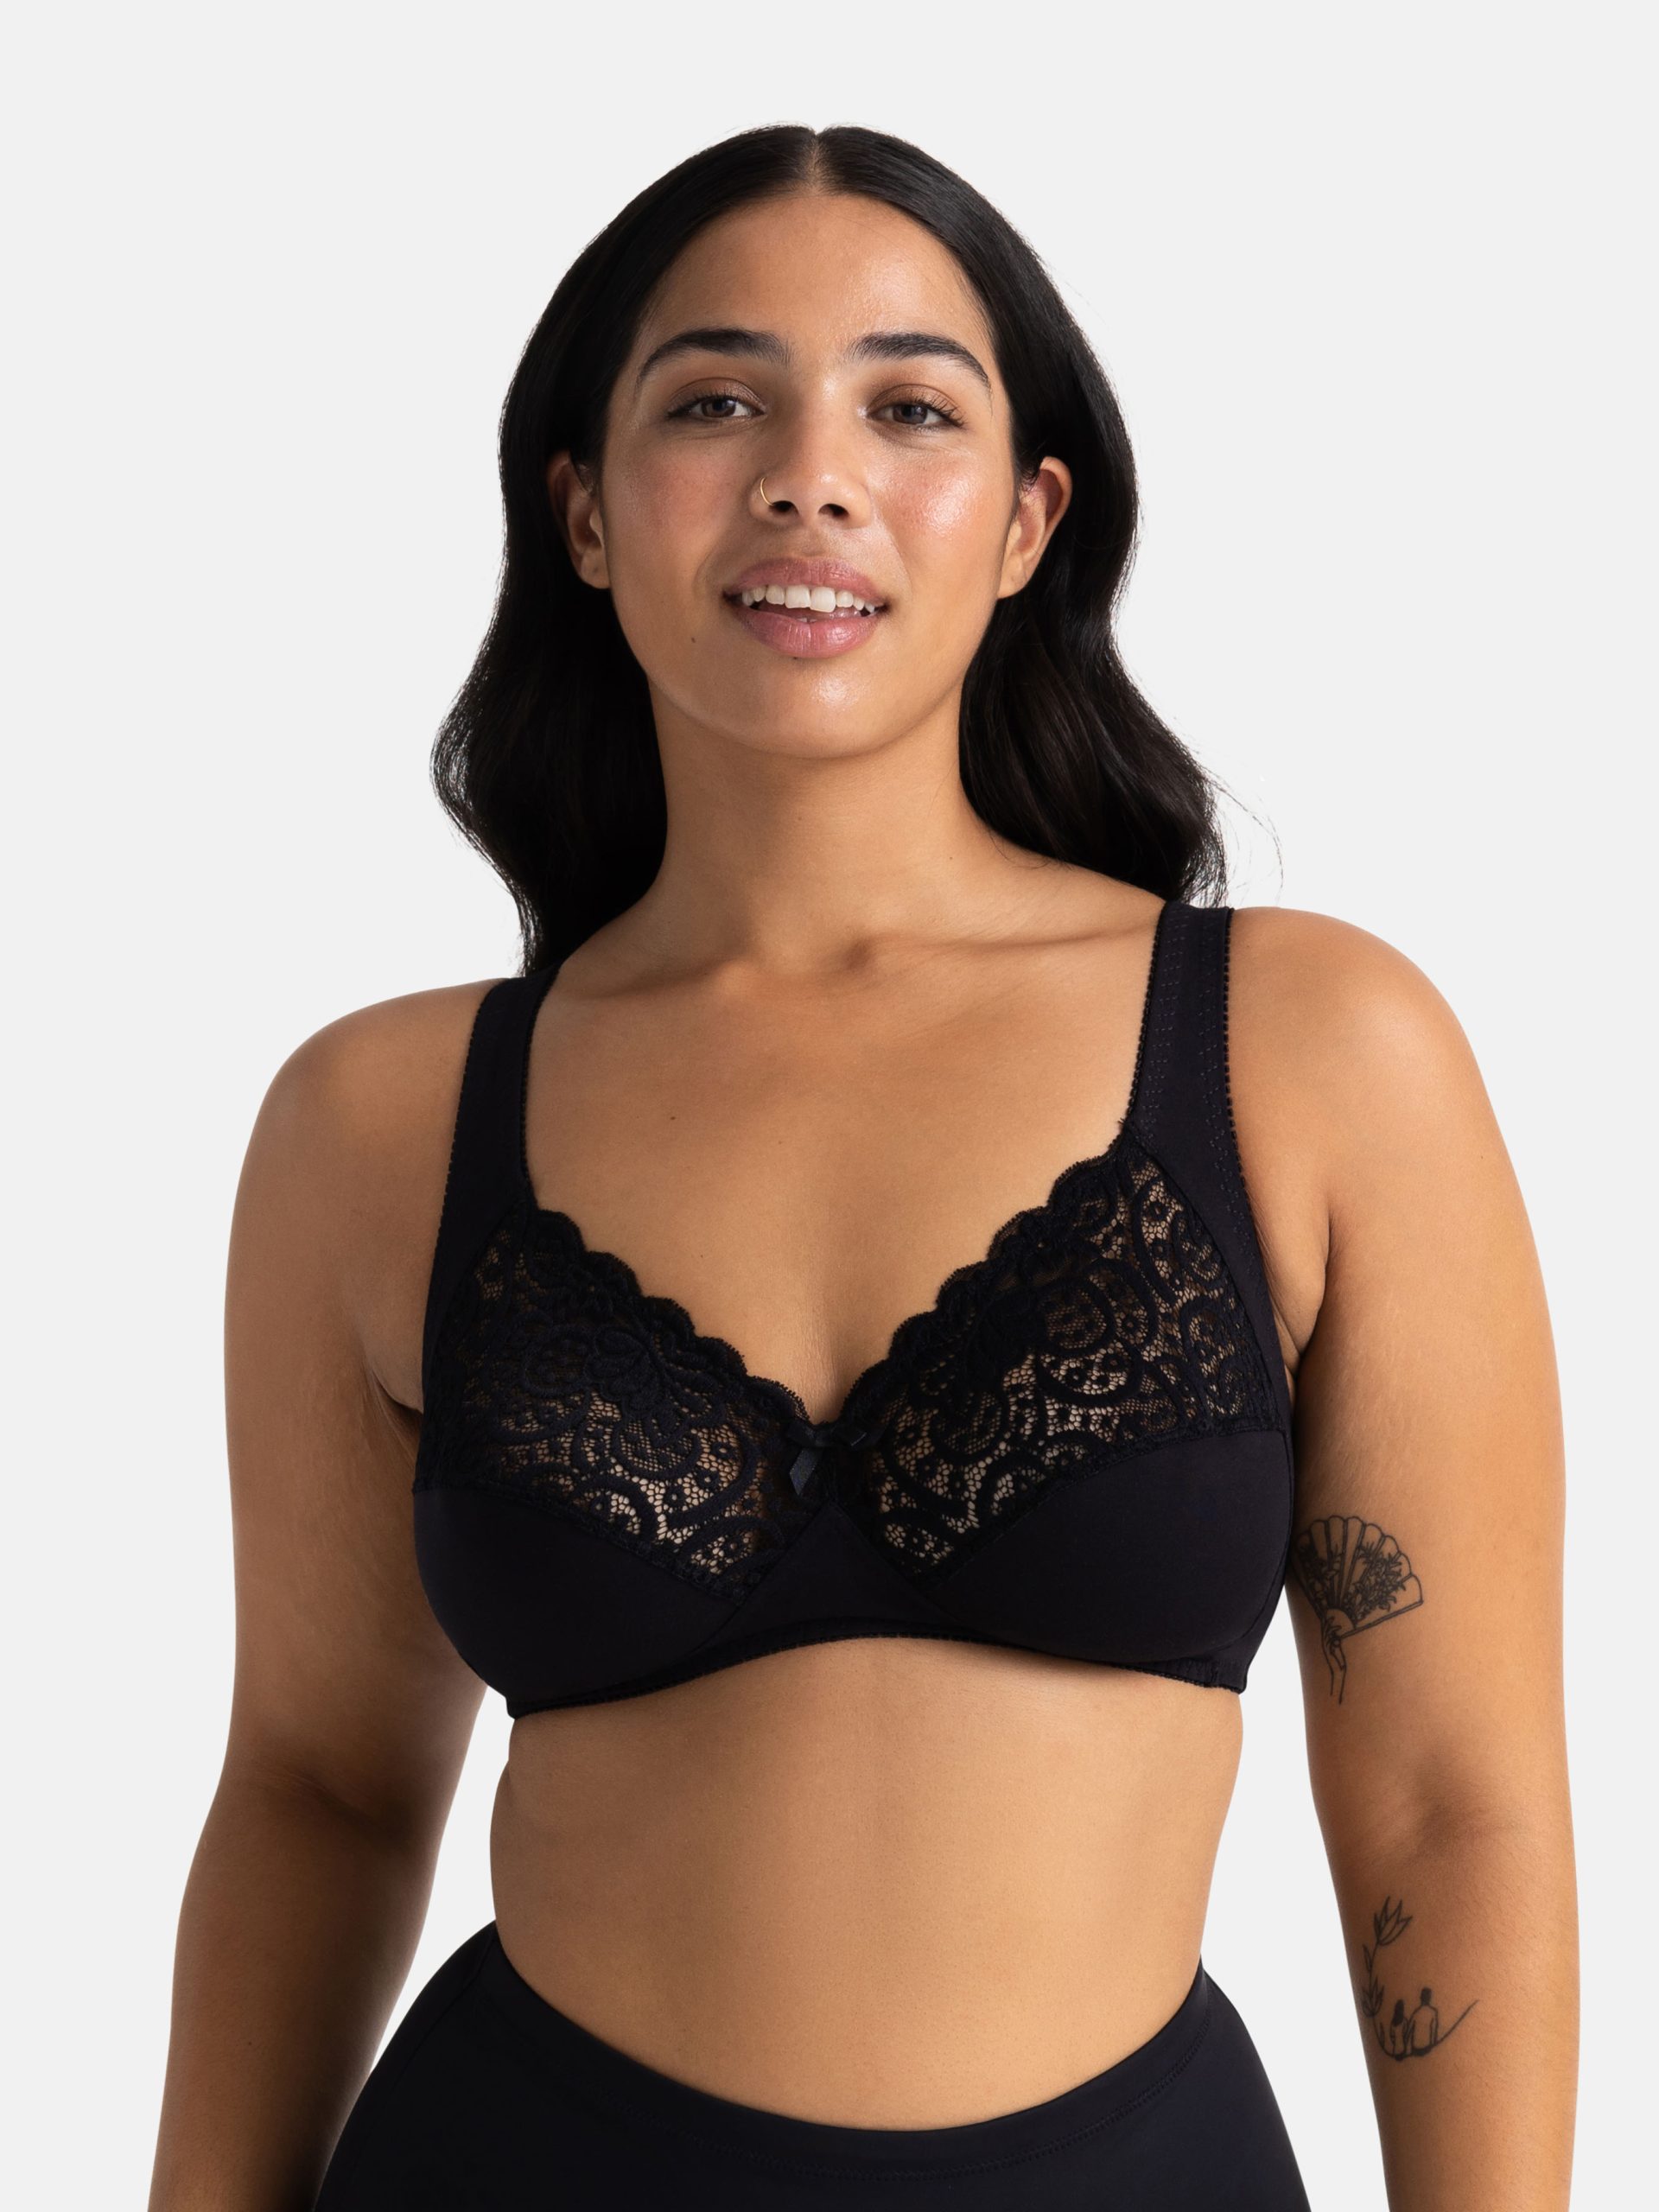 Gorsenia Martynika K671-CZA Black Embroidered Non-Padded Underwired Full Cup  Bra 36M (J UK) 